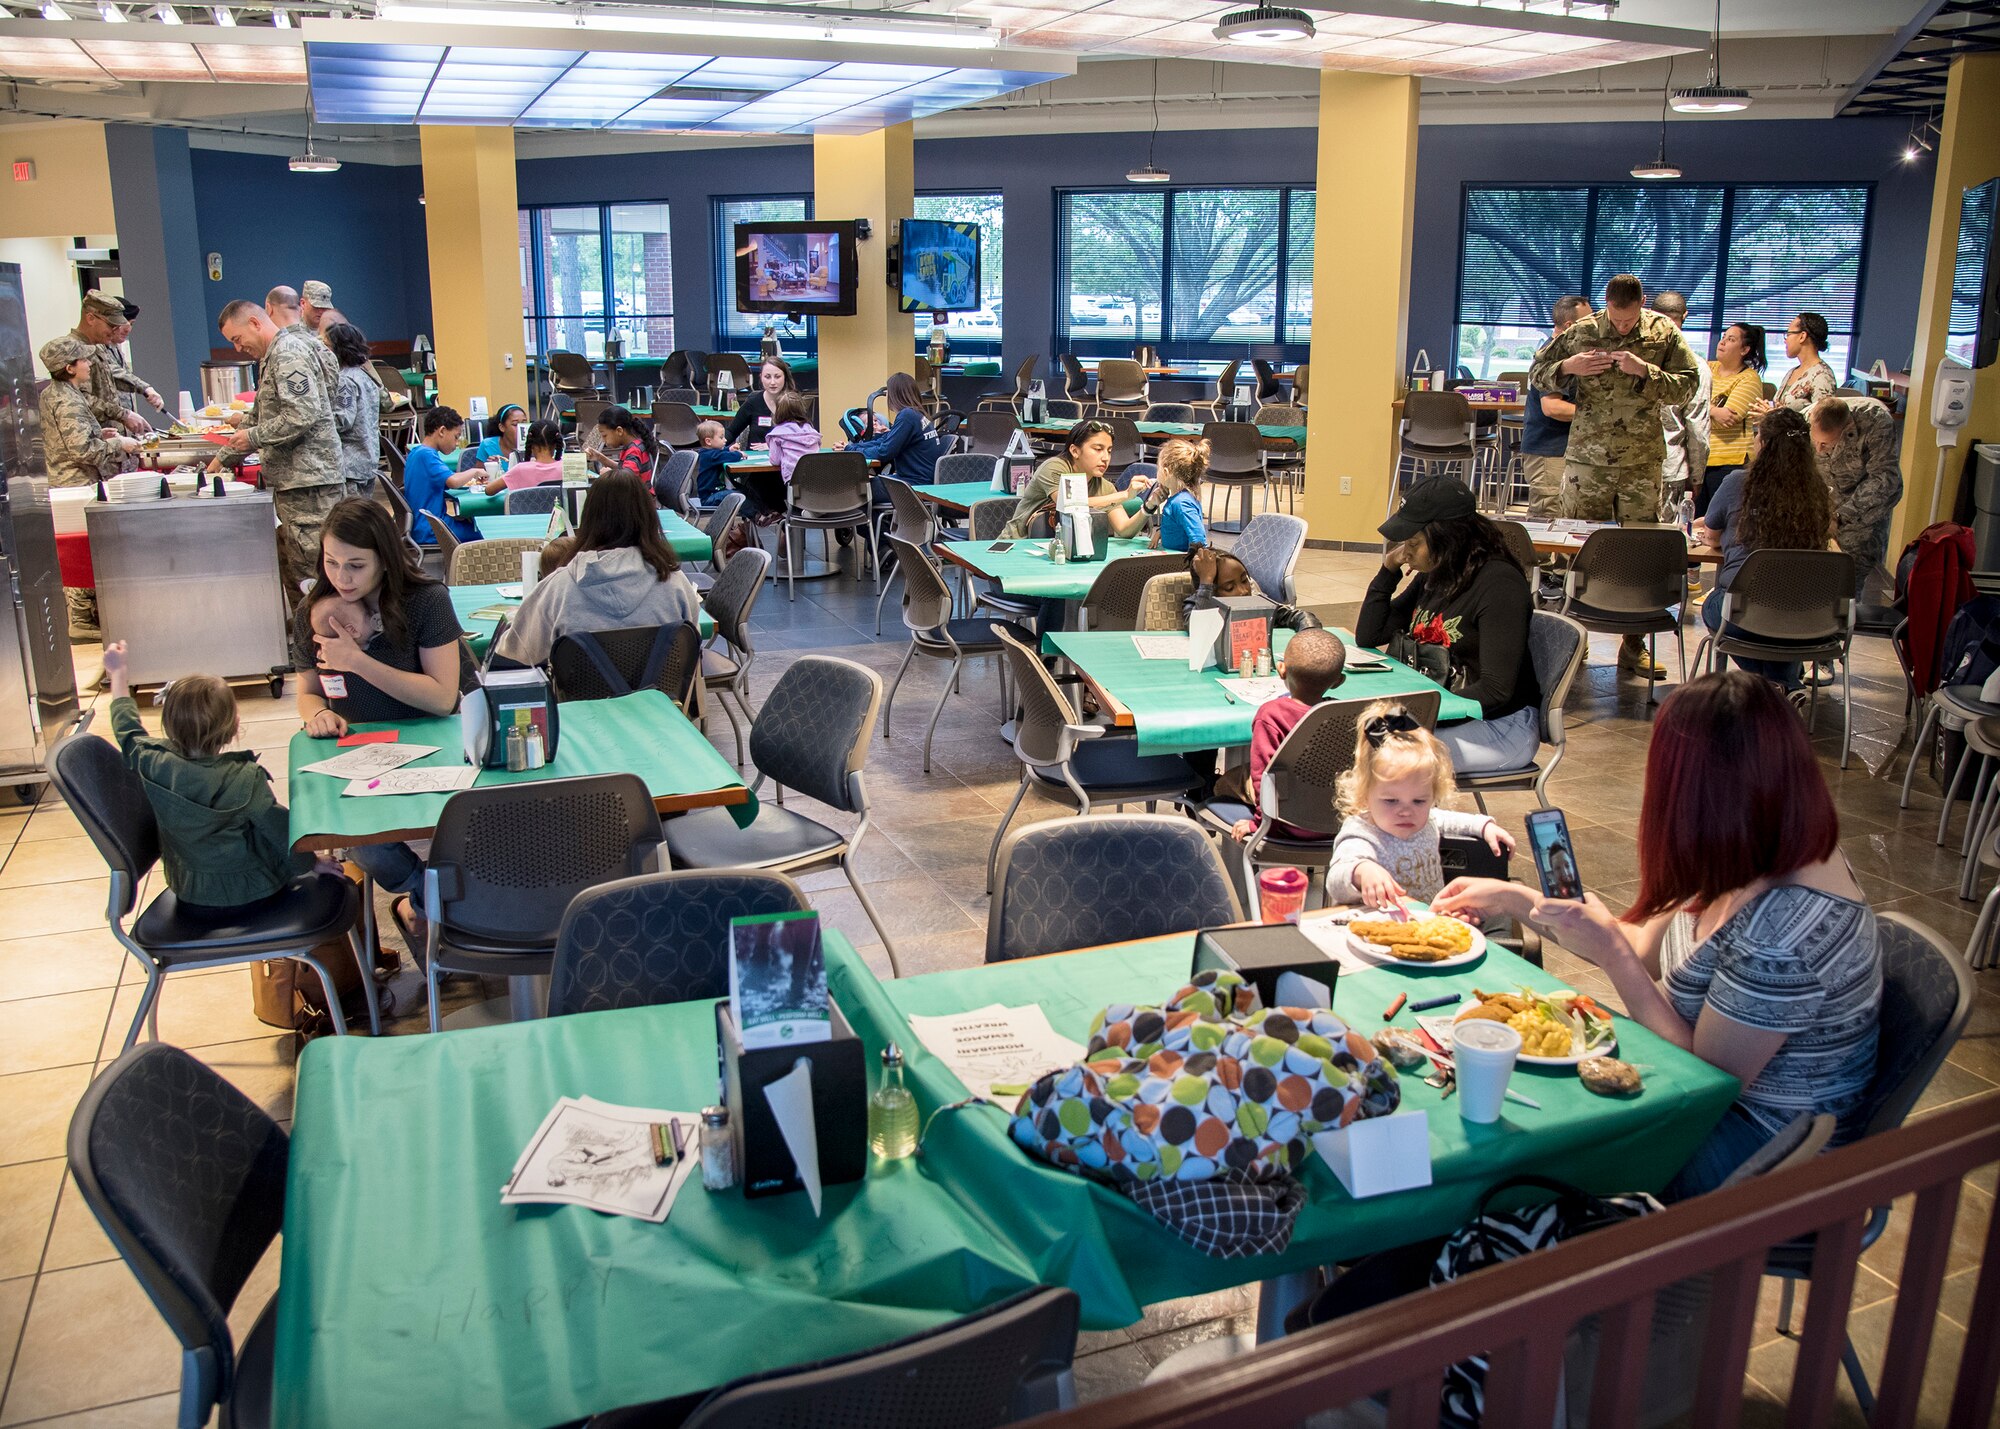 Participants eat and socialize during a deployed spouses dinner, March 19, 2019, at Moody Air Force Base, Ga. The mission’s success depends on resilient Airmen and families, who are prepared to make sacrifices with the support of their fellow Airmen, local communities and leadership. (U.S. Air Force photo by Airman 1st Class Eugene Oliver)